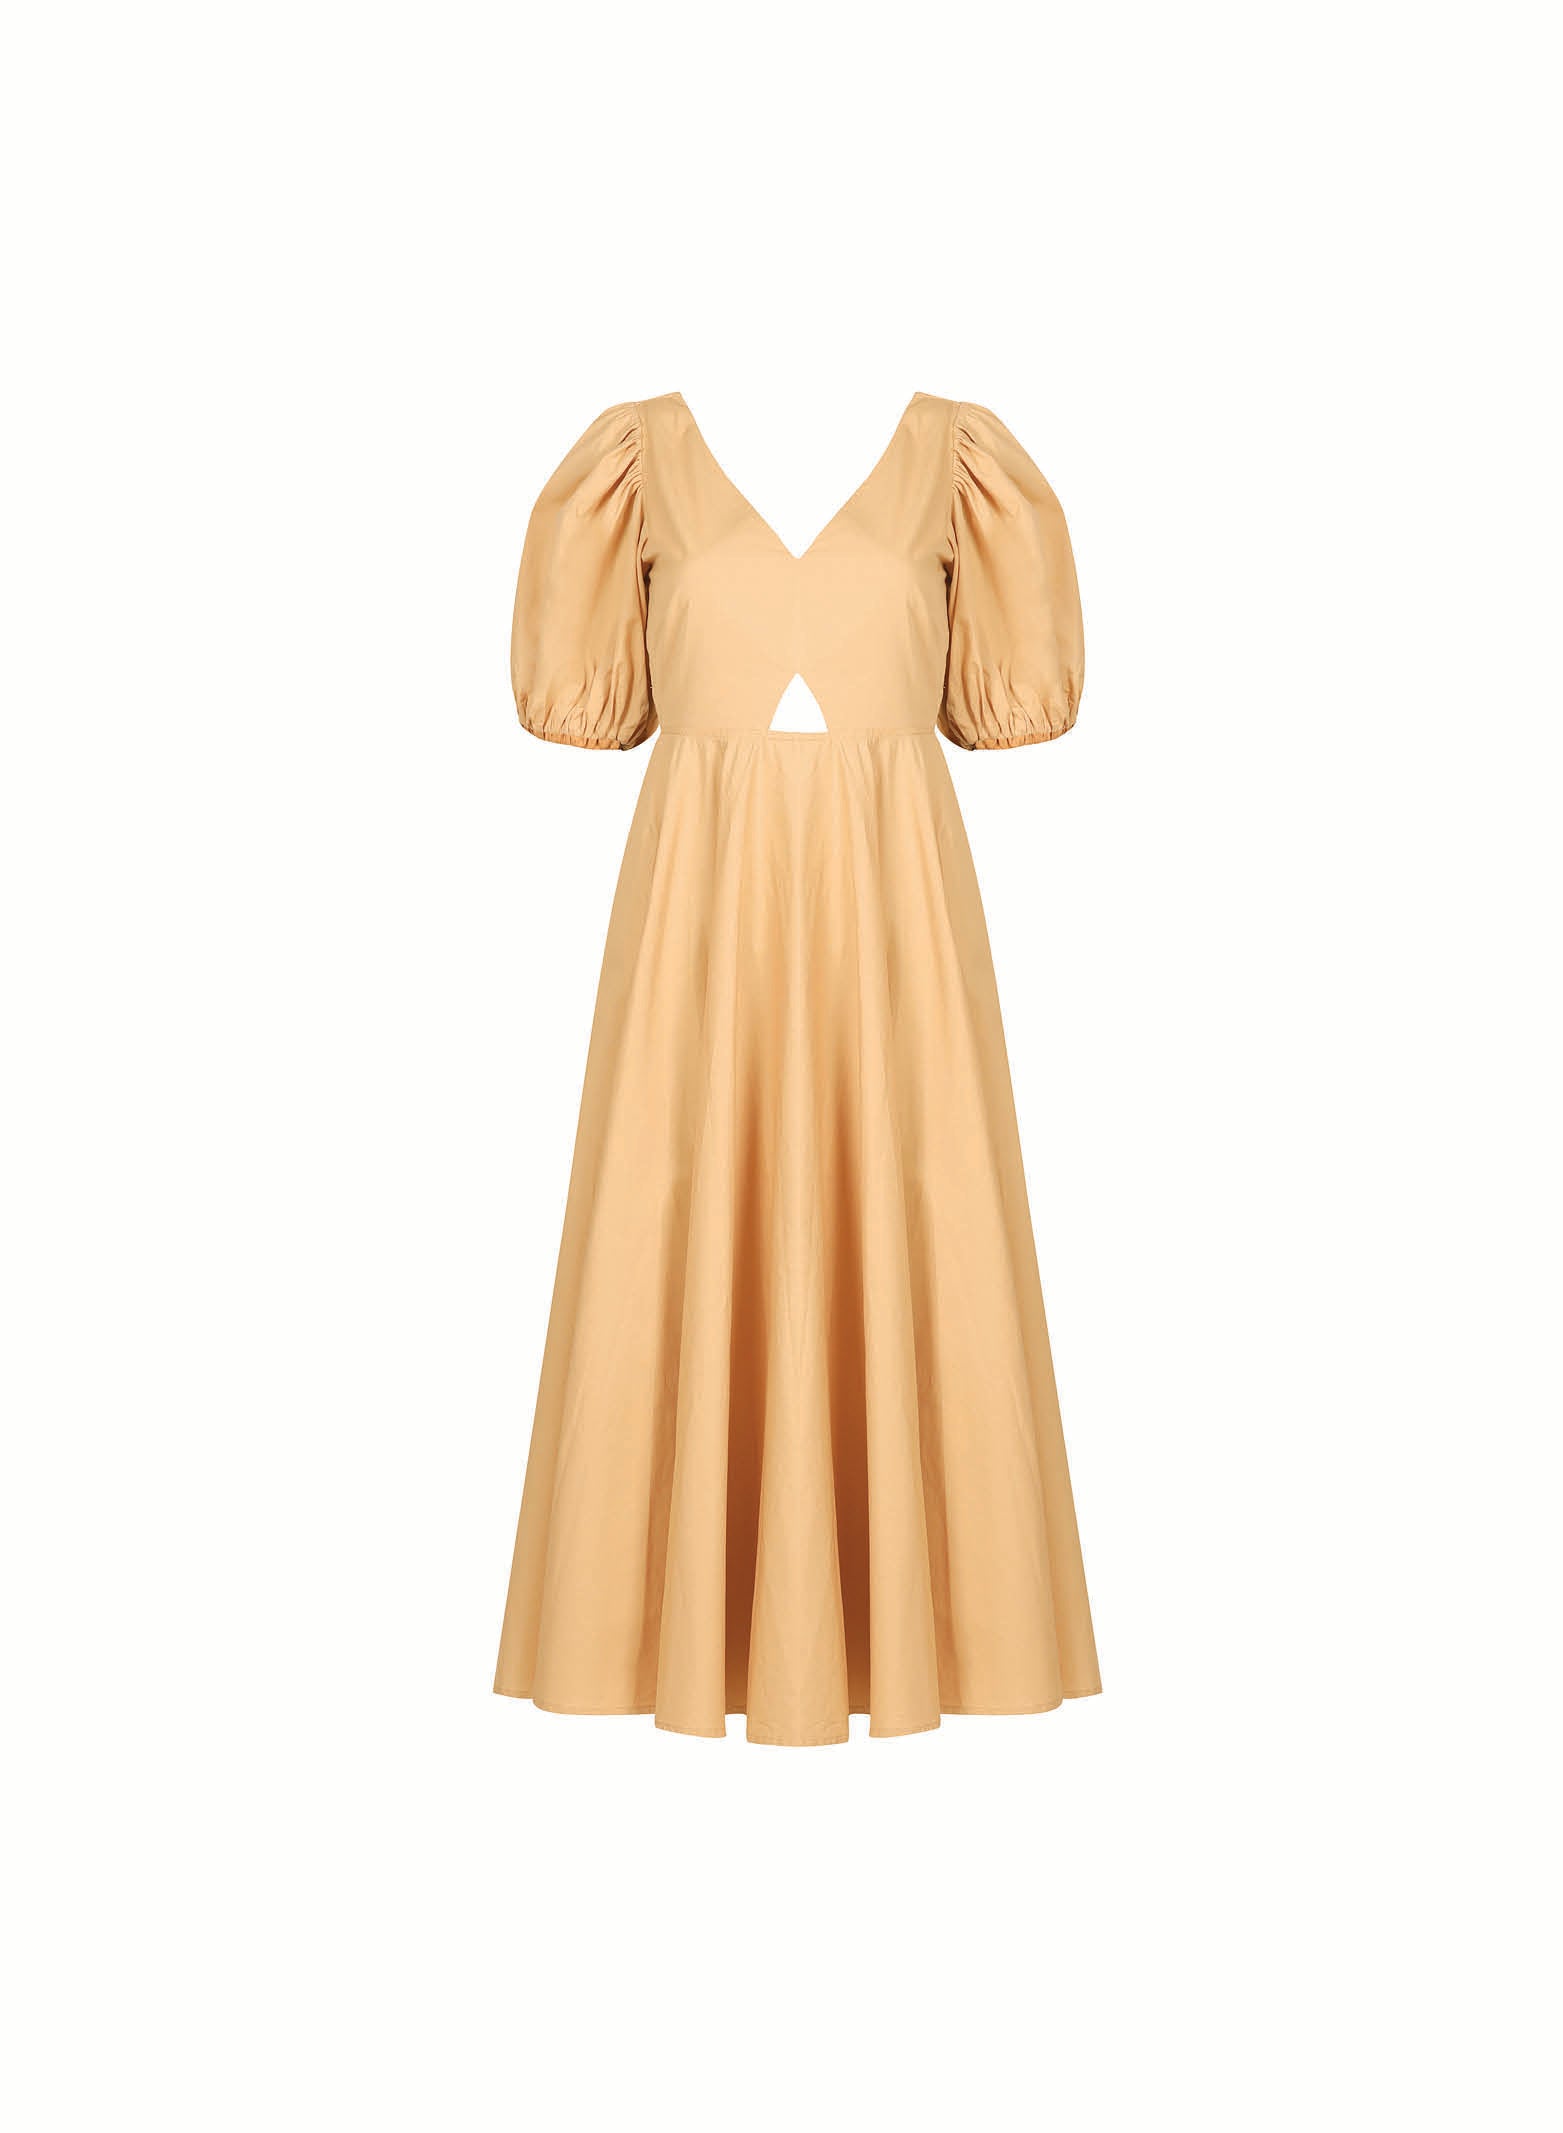 Dune Dress (60% off - Use code MALIE60 at checkout)